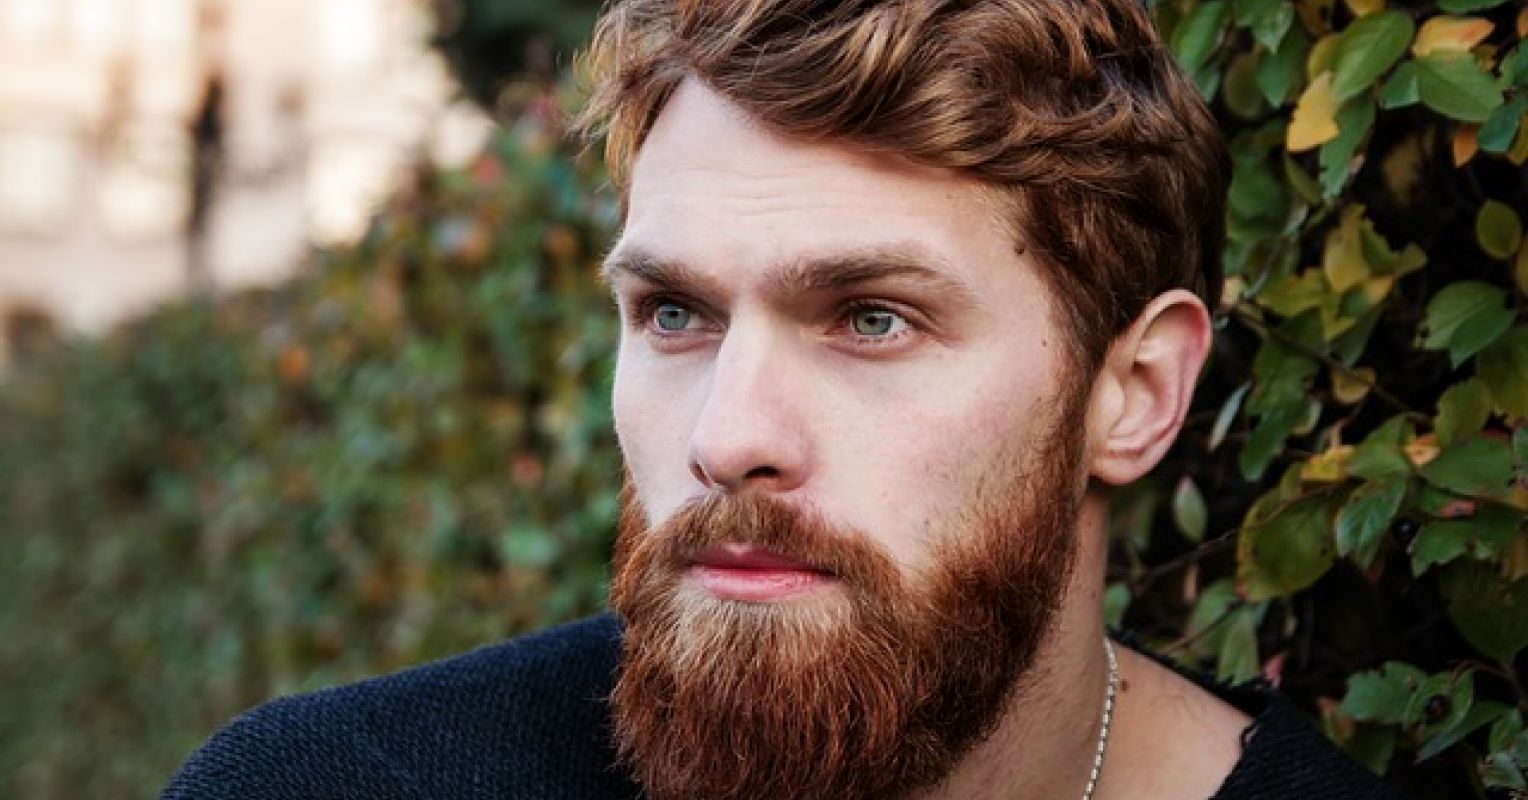 Hacking Beard Growth: Separating Fact from Fiction